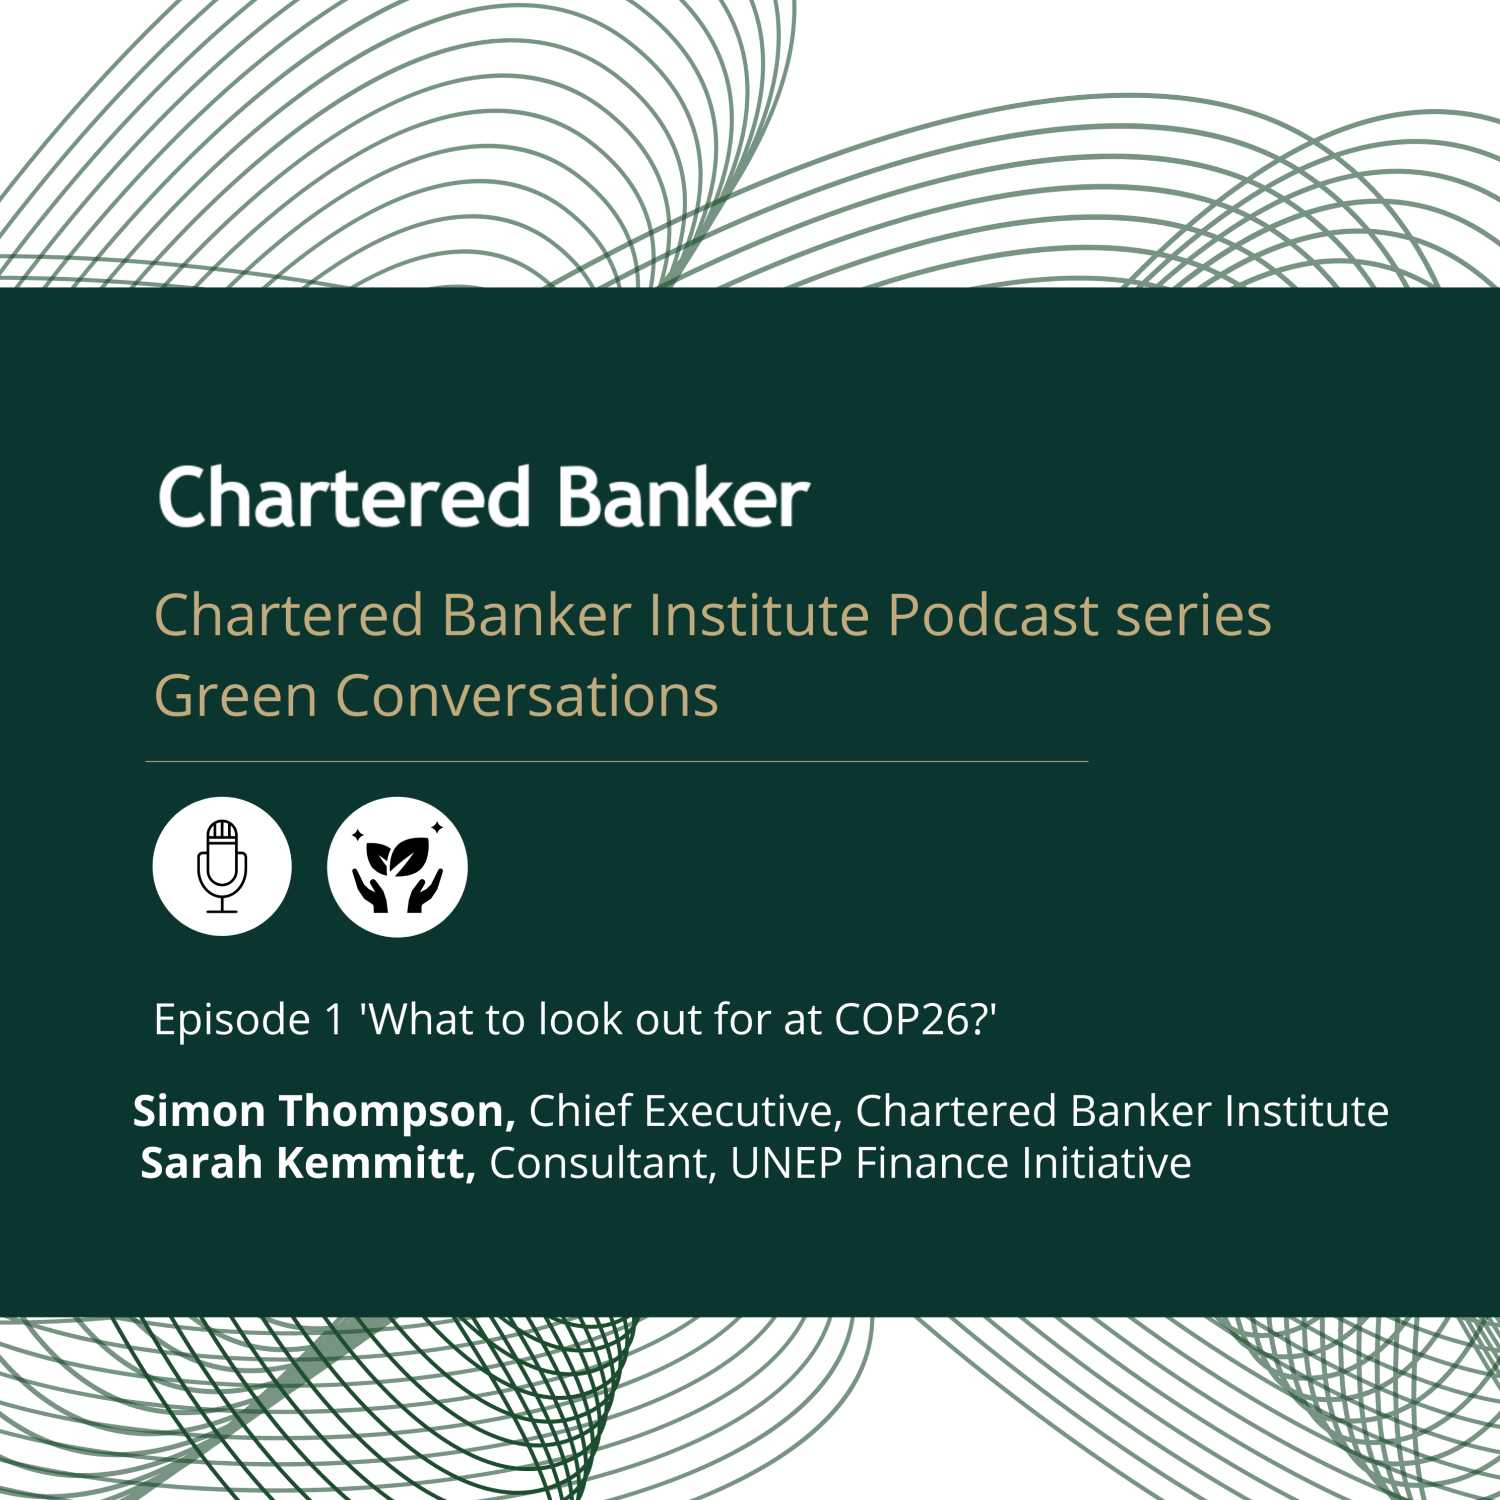 S3 E1 In conversation with Sarah Kemmitt from UNEP FI - Green Conversations